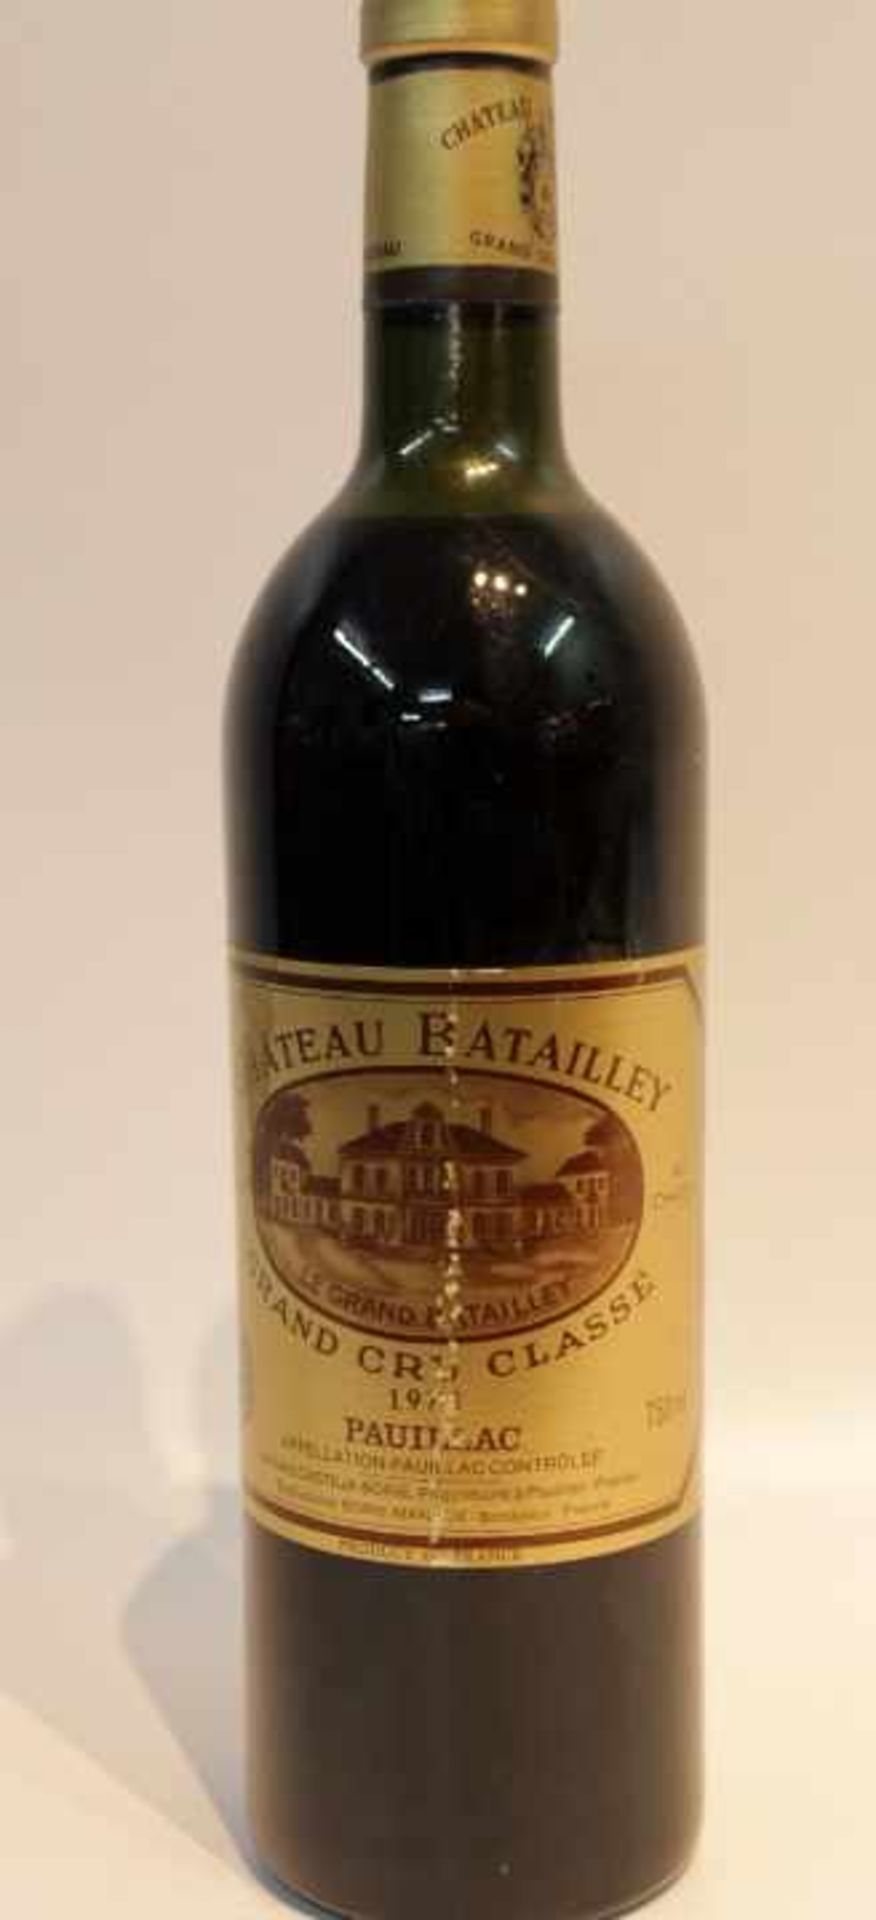 1973 Chateau Batailley 6 FlaschenMis en Bouteille Au ChateauGrand Cru ClassePauillac 750 ml